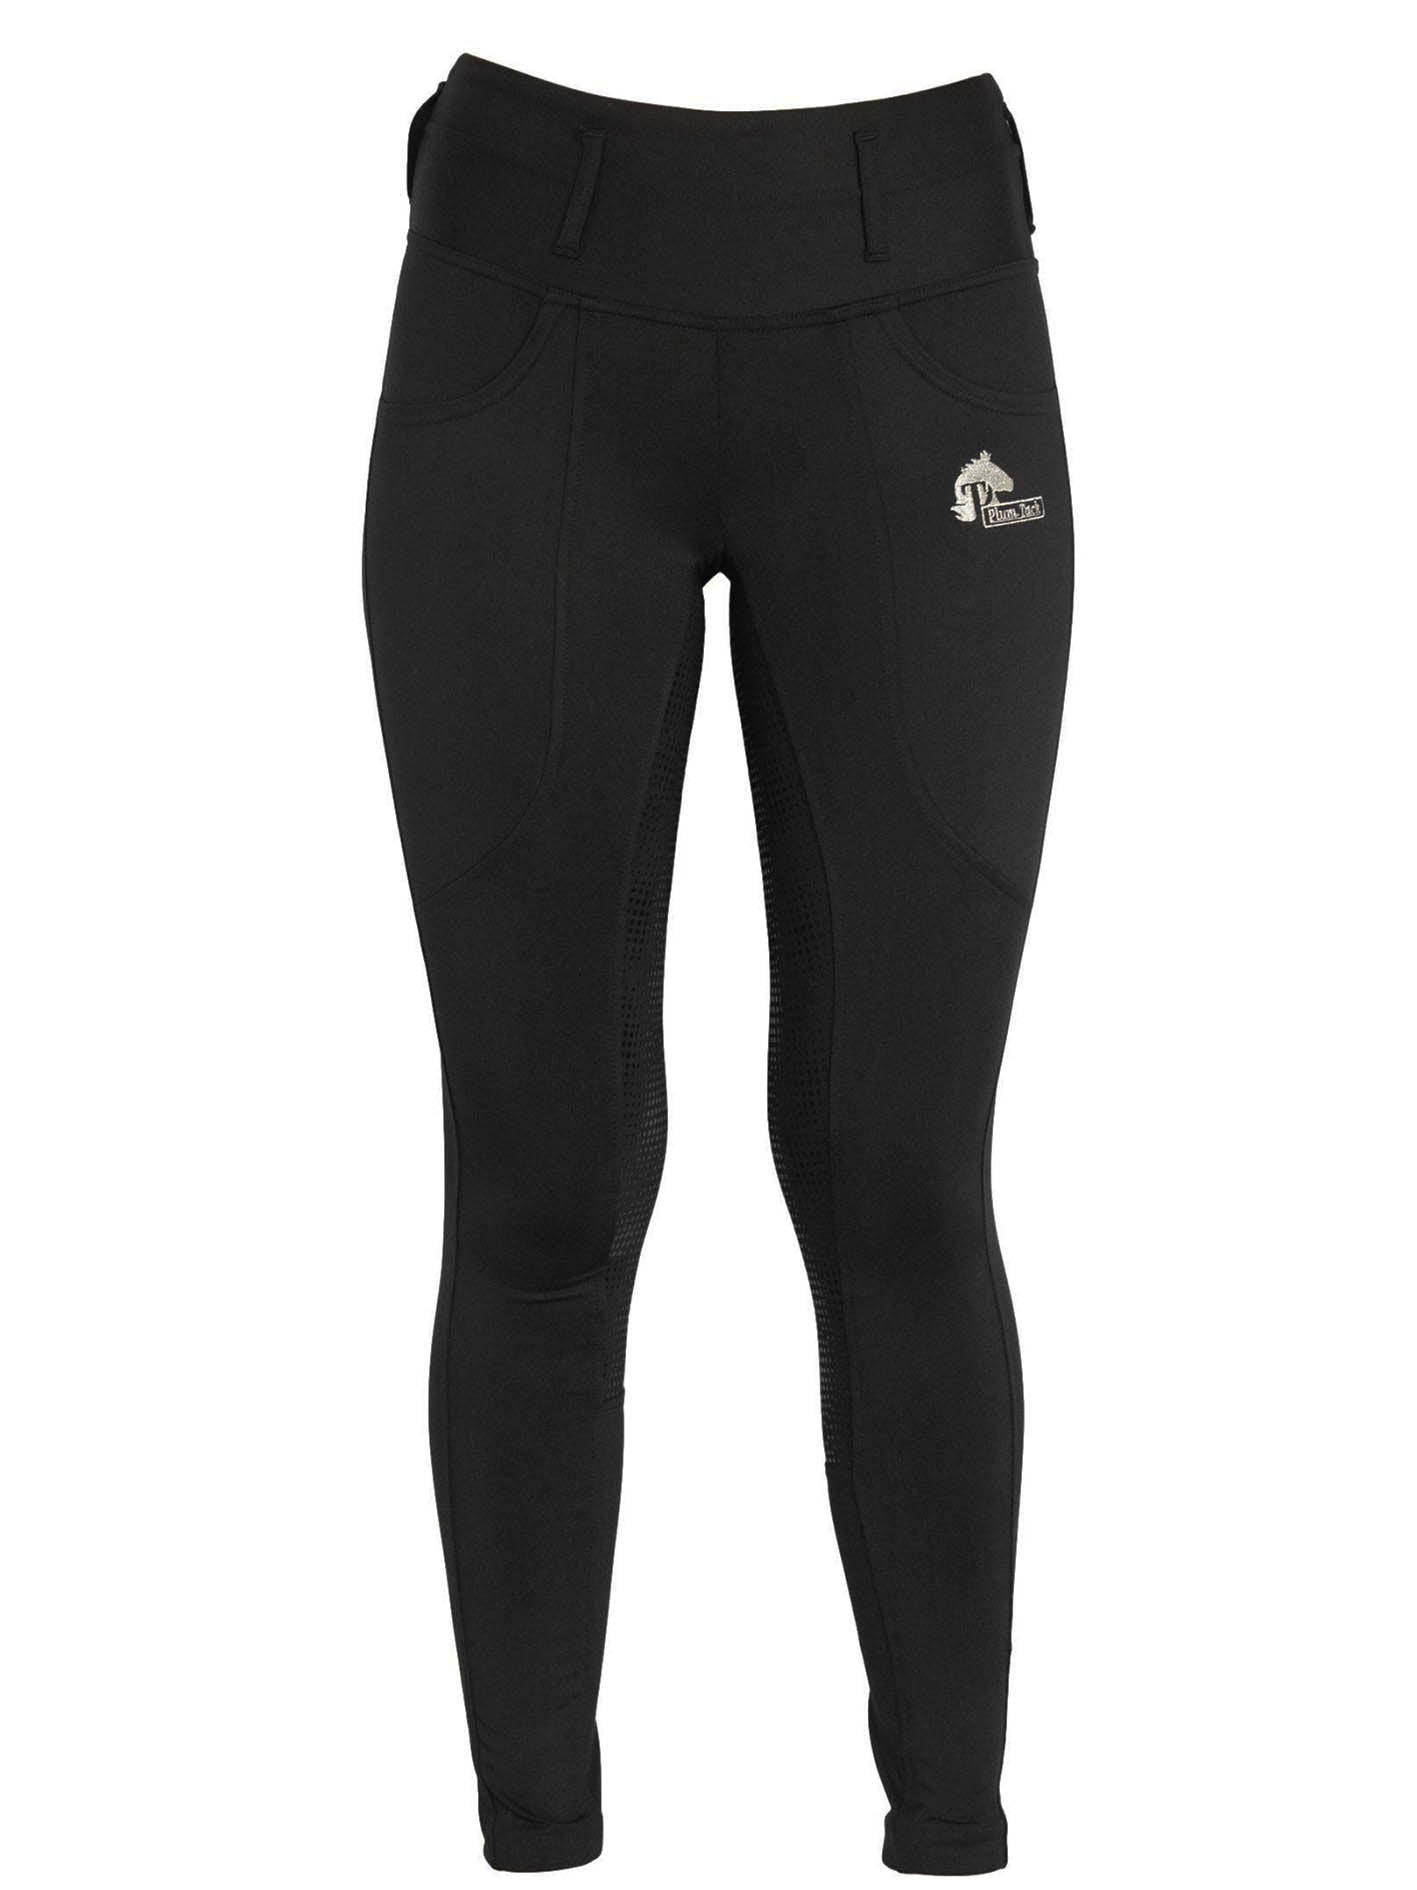 Women's Full Seat Riding Leggings Active Silicon Grip with Large